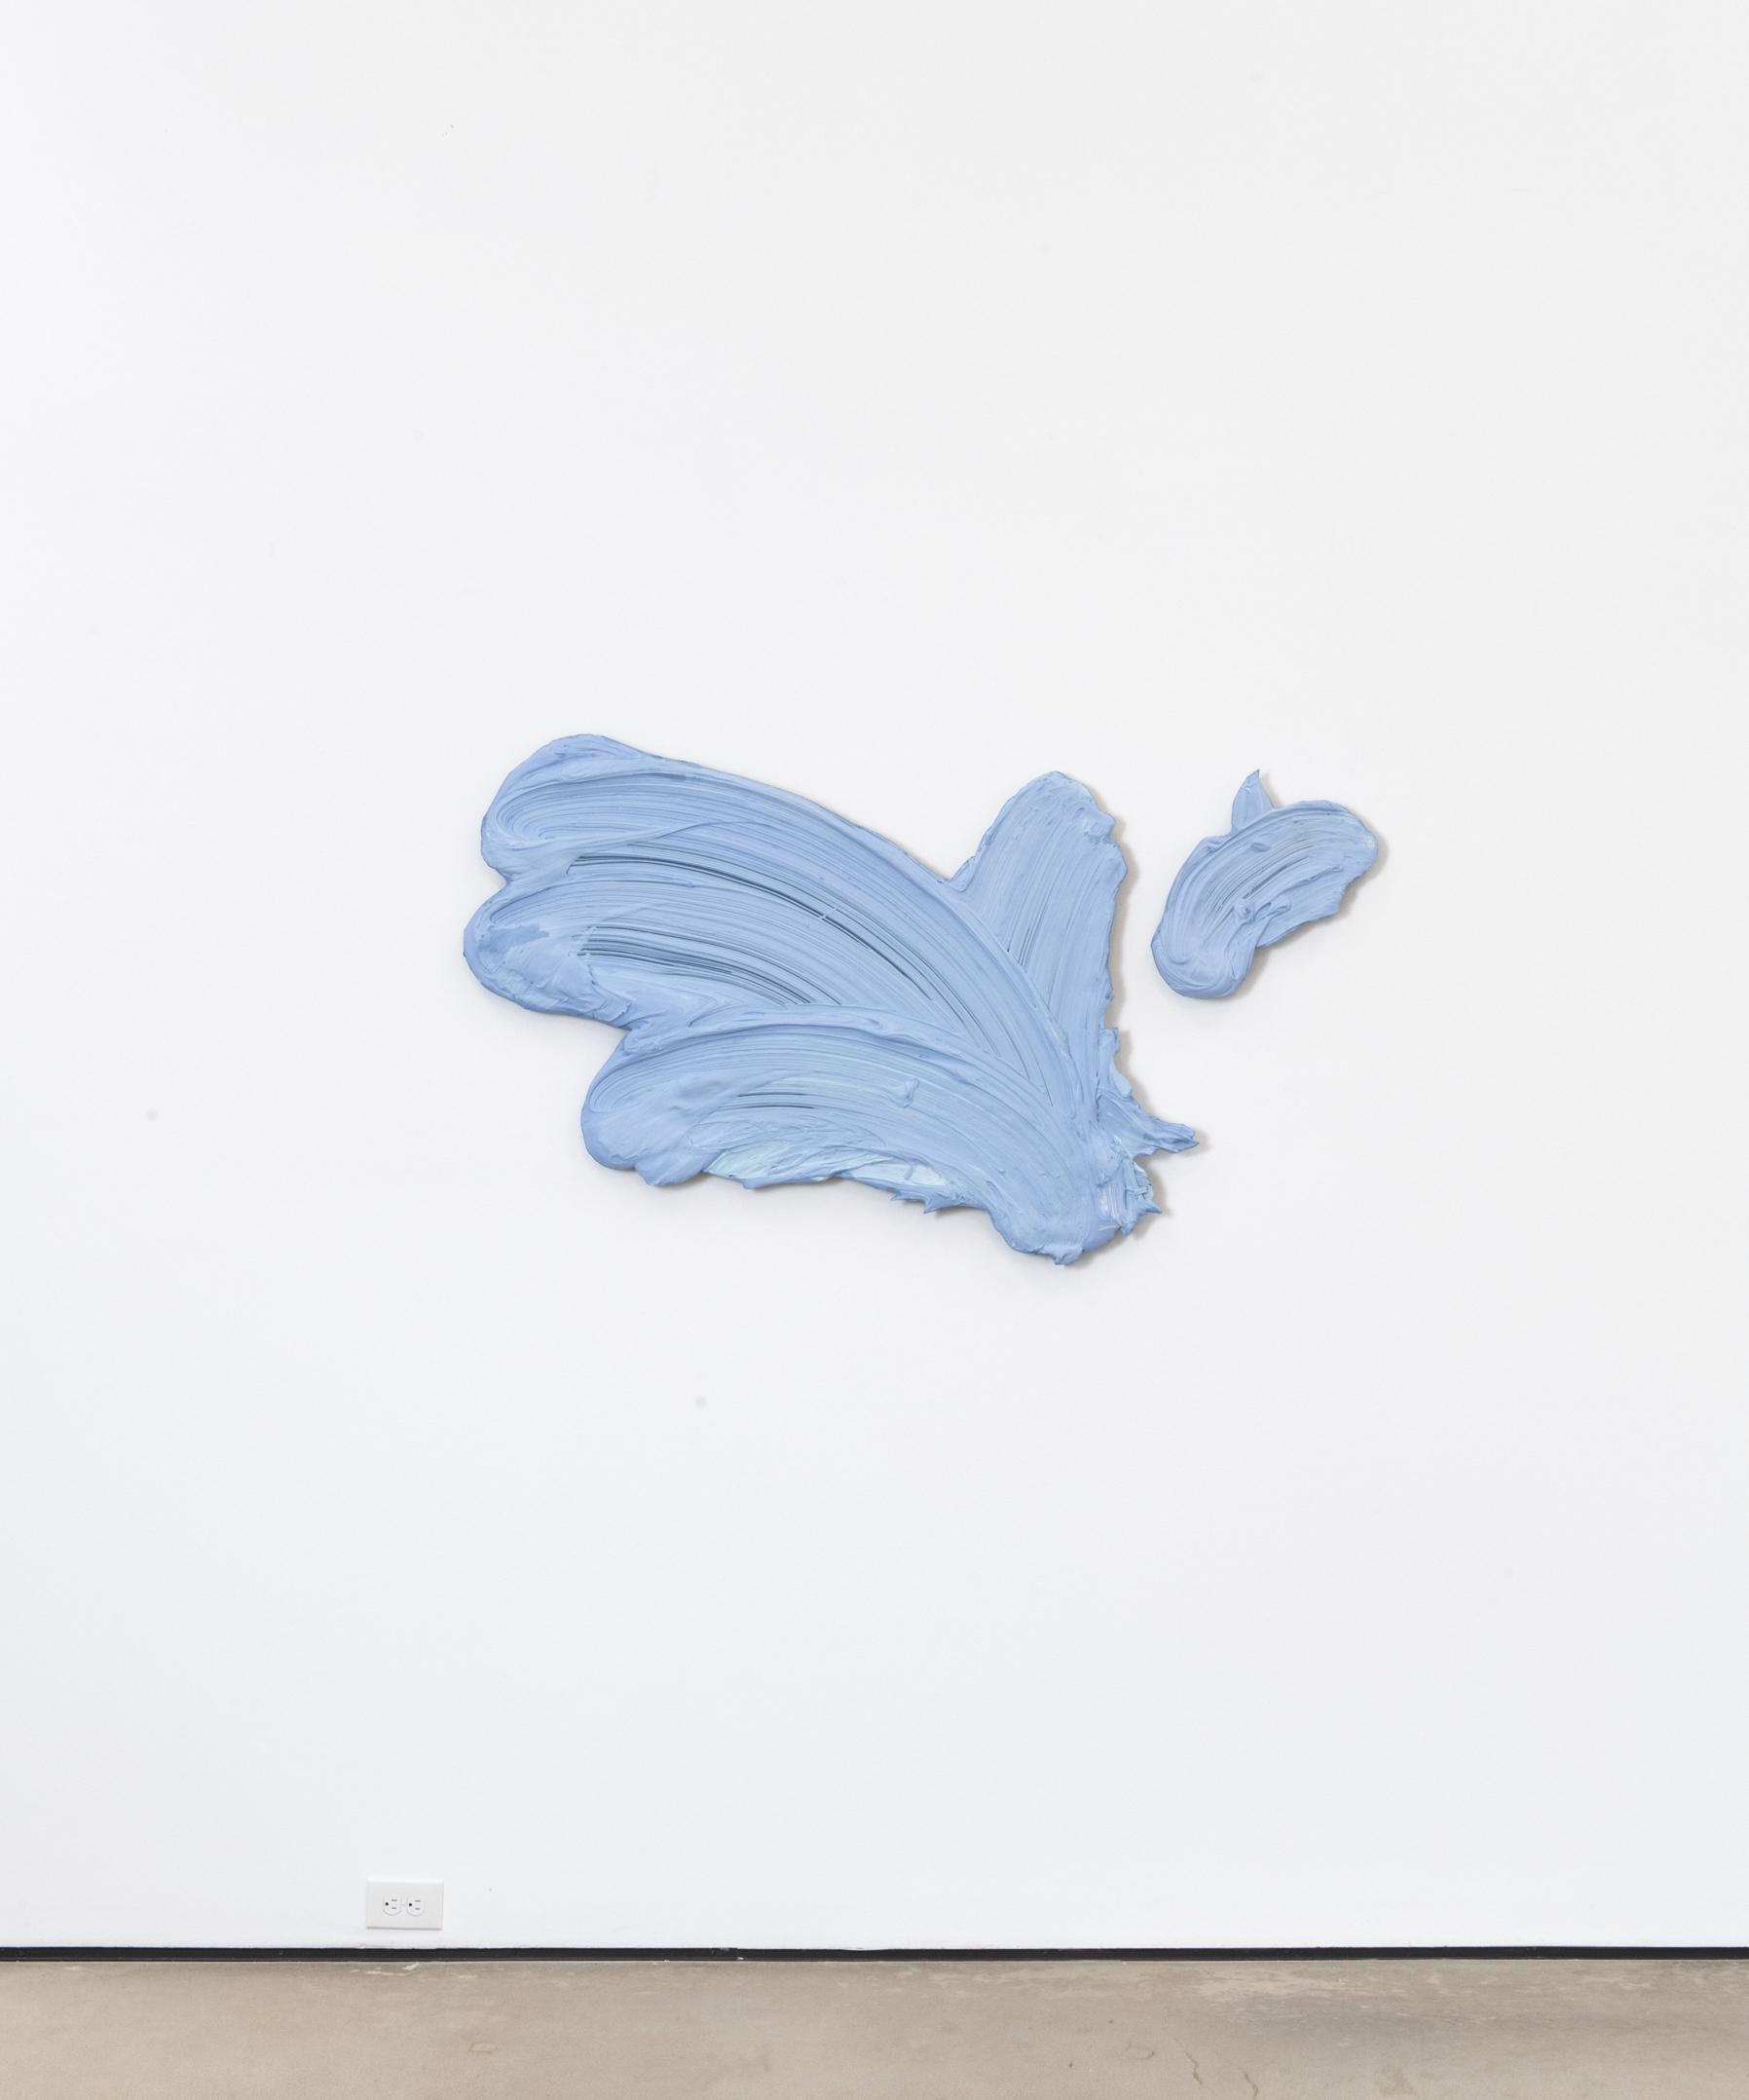 Remembered Hills - Mixed Media Art by Donald Martiny